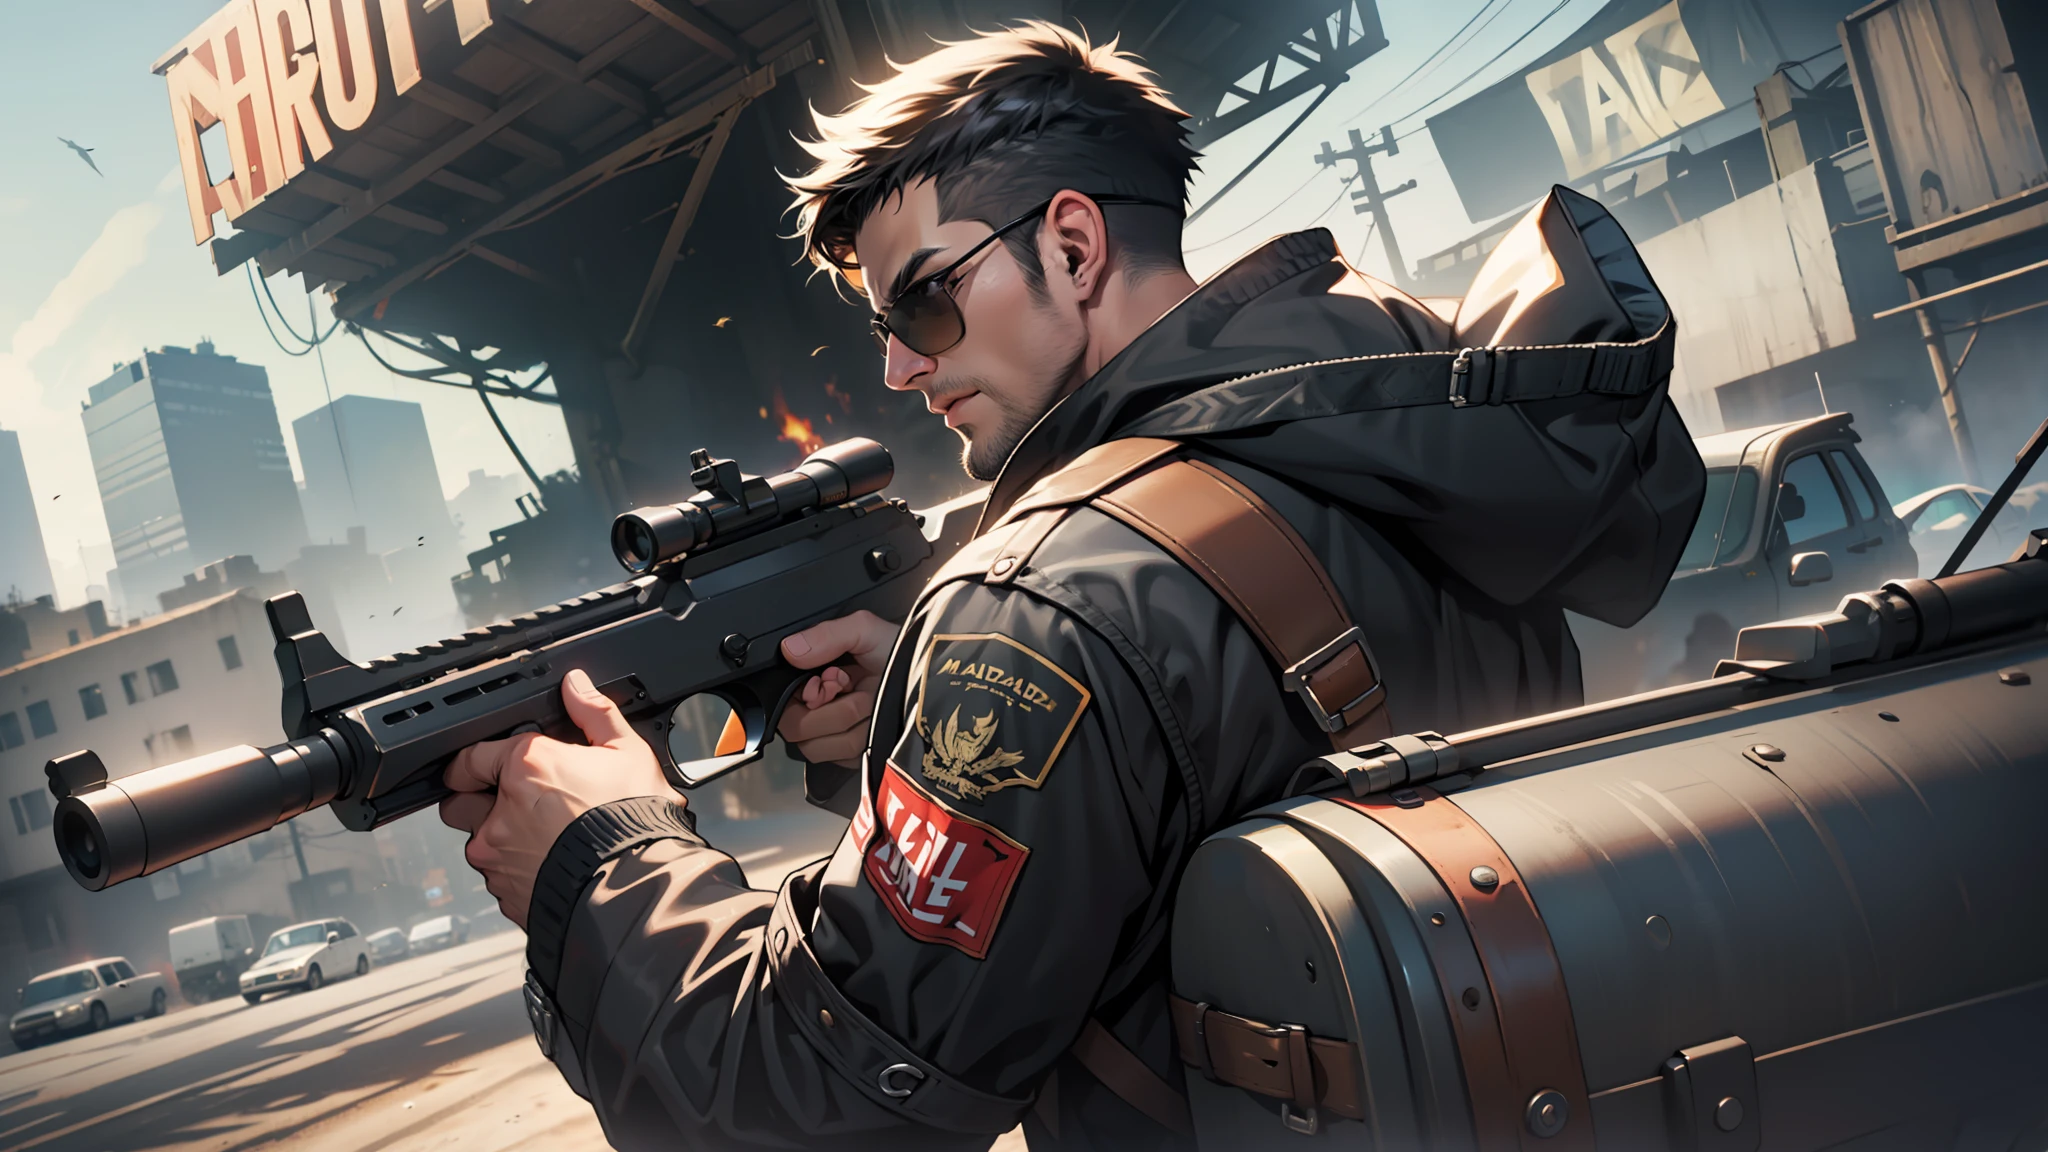 A guy wearing black jacket and sunglasses, aiming with a gun to the right, mad max style, shoot from behind of the guy